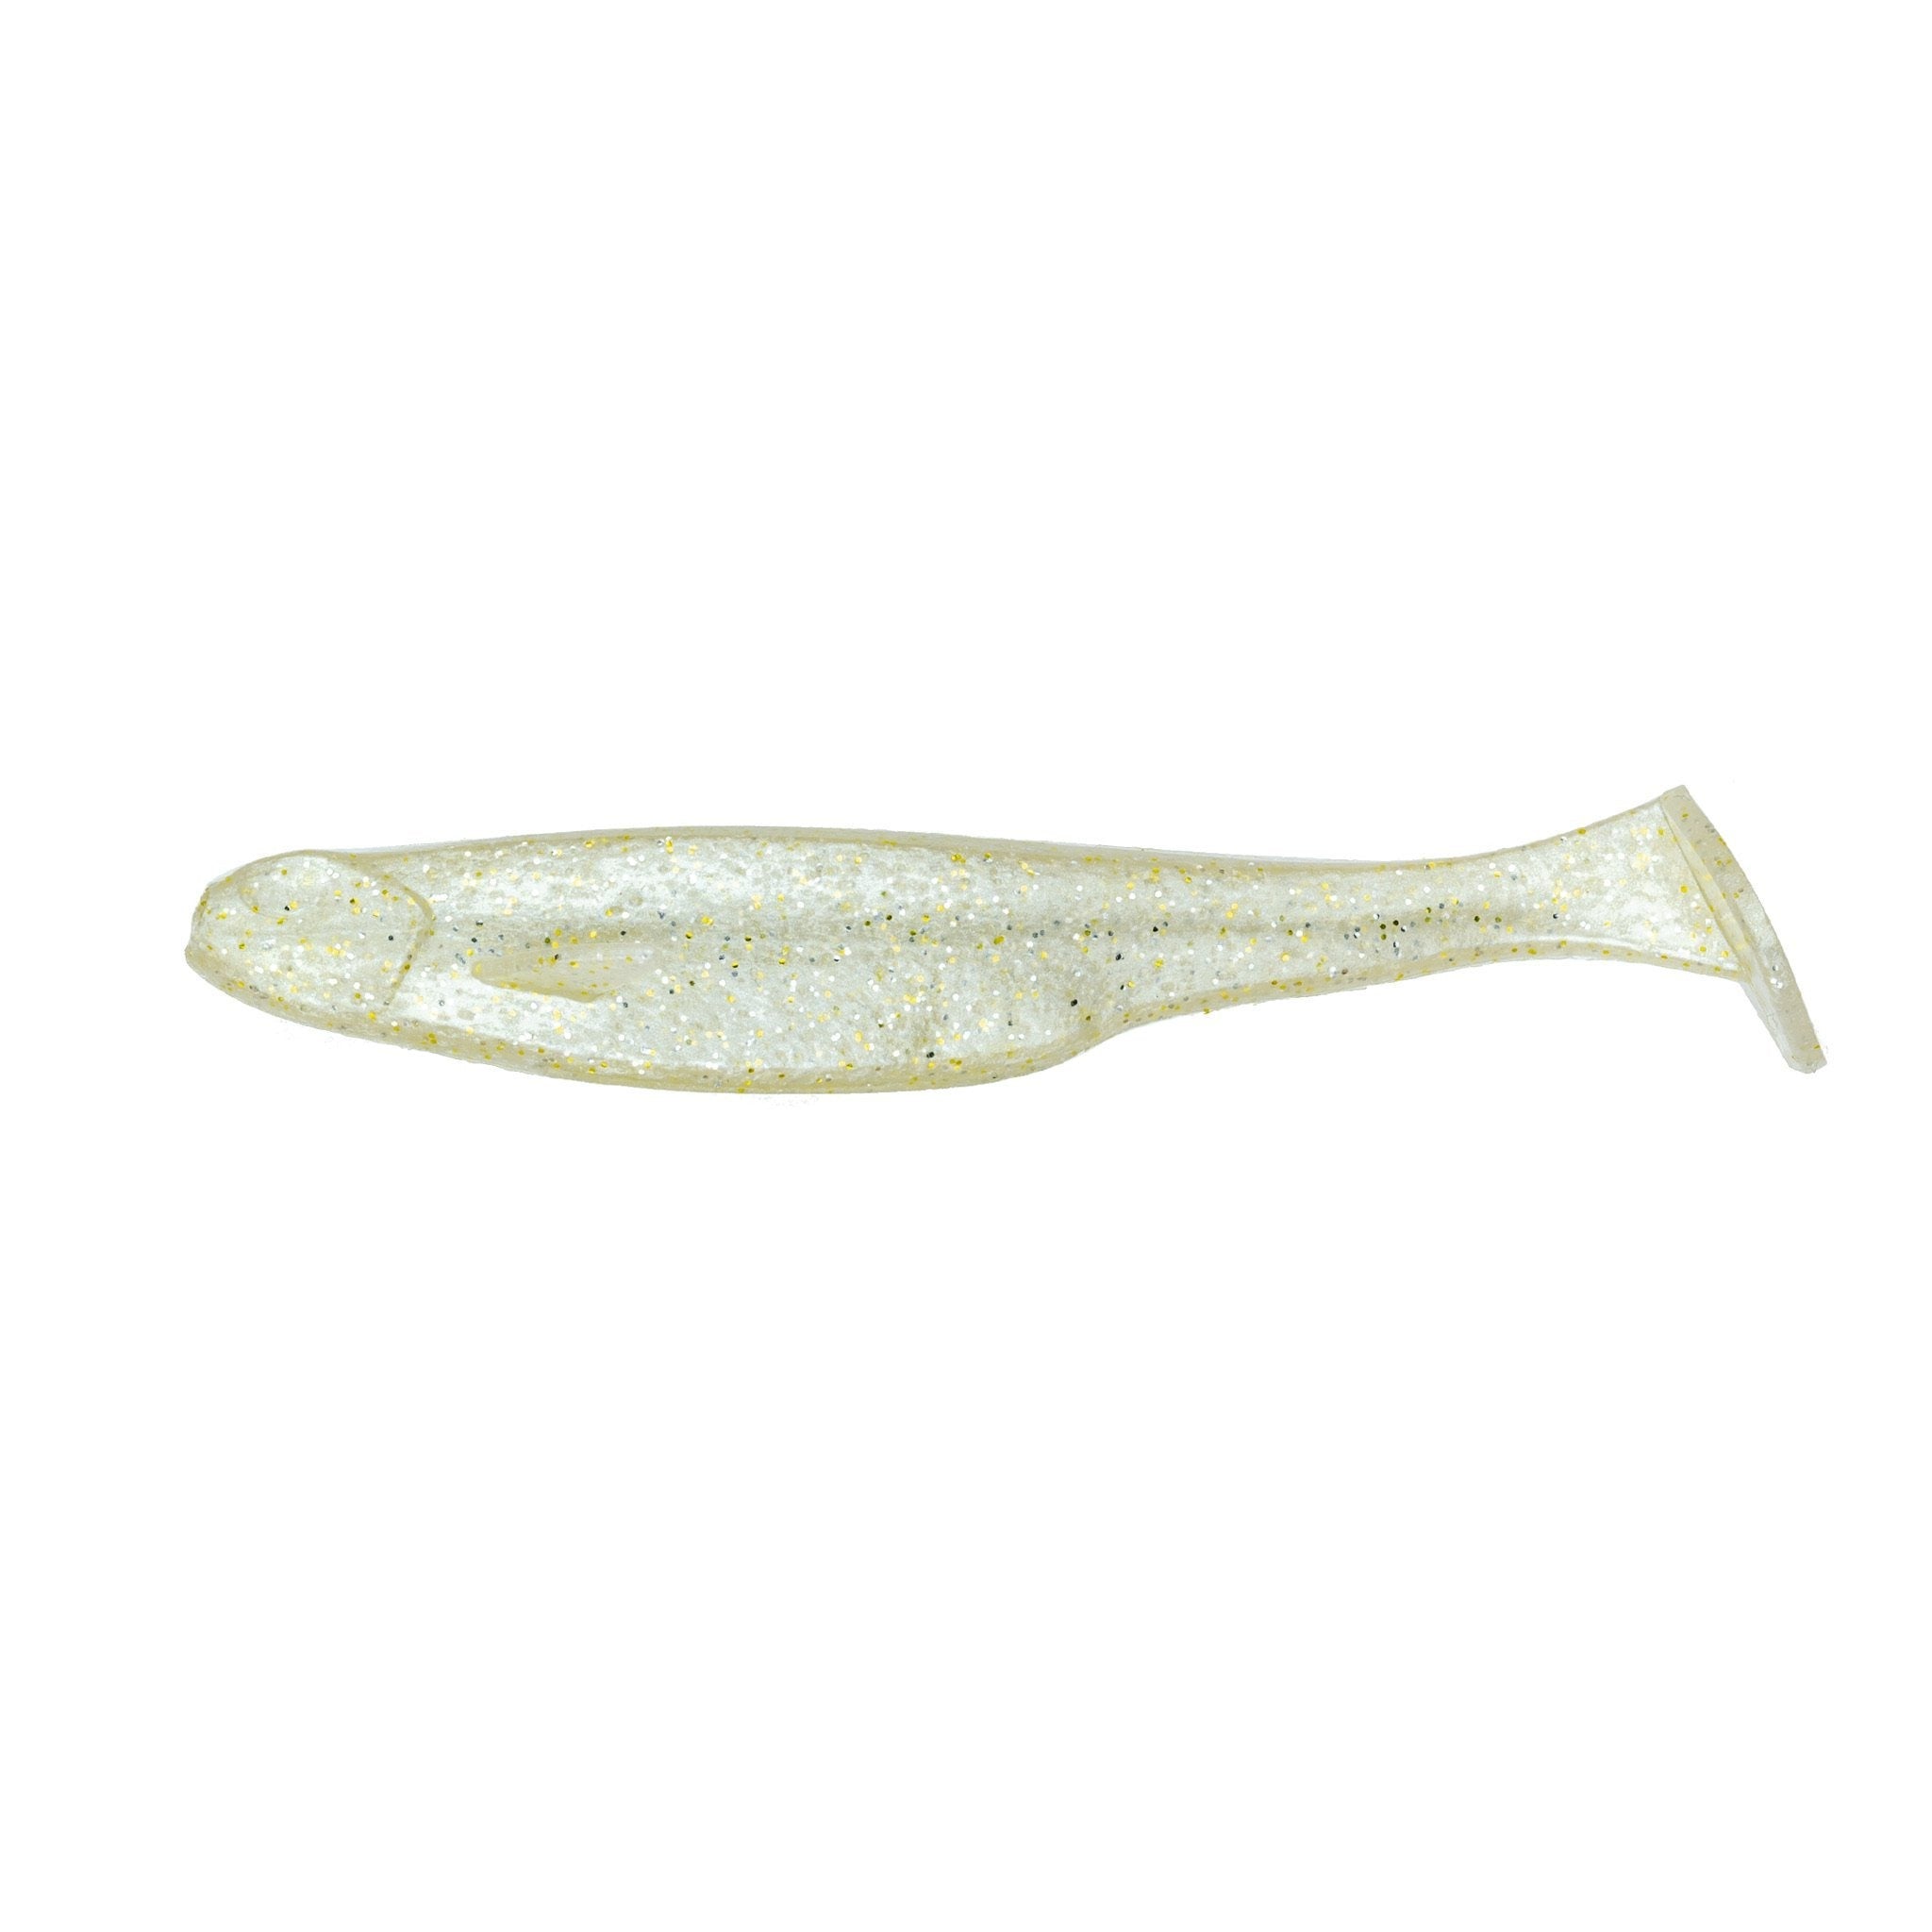 New Soft Plastic Swimbaits from 6th Sense Fishing Products - 6th